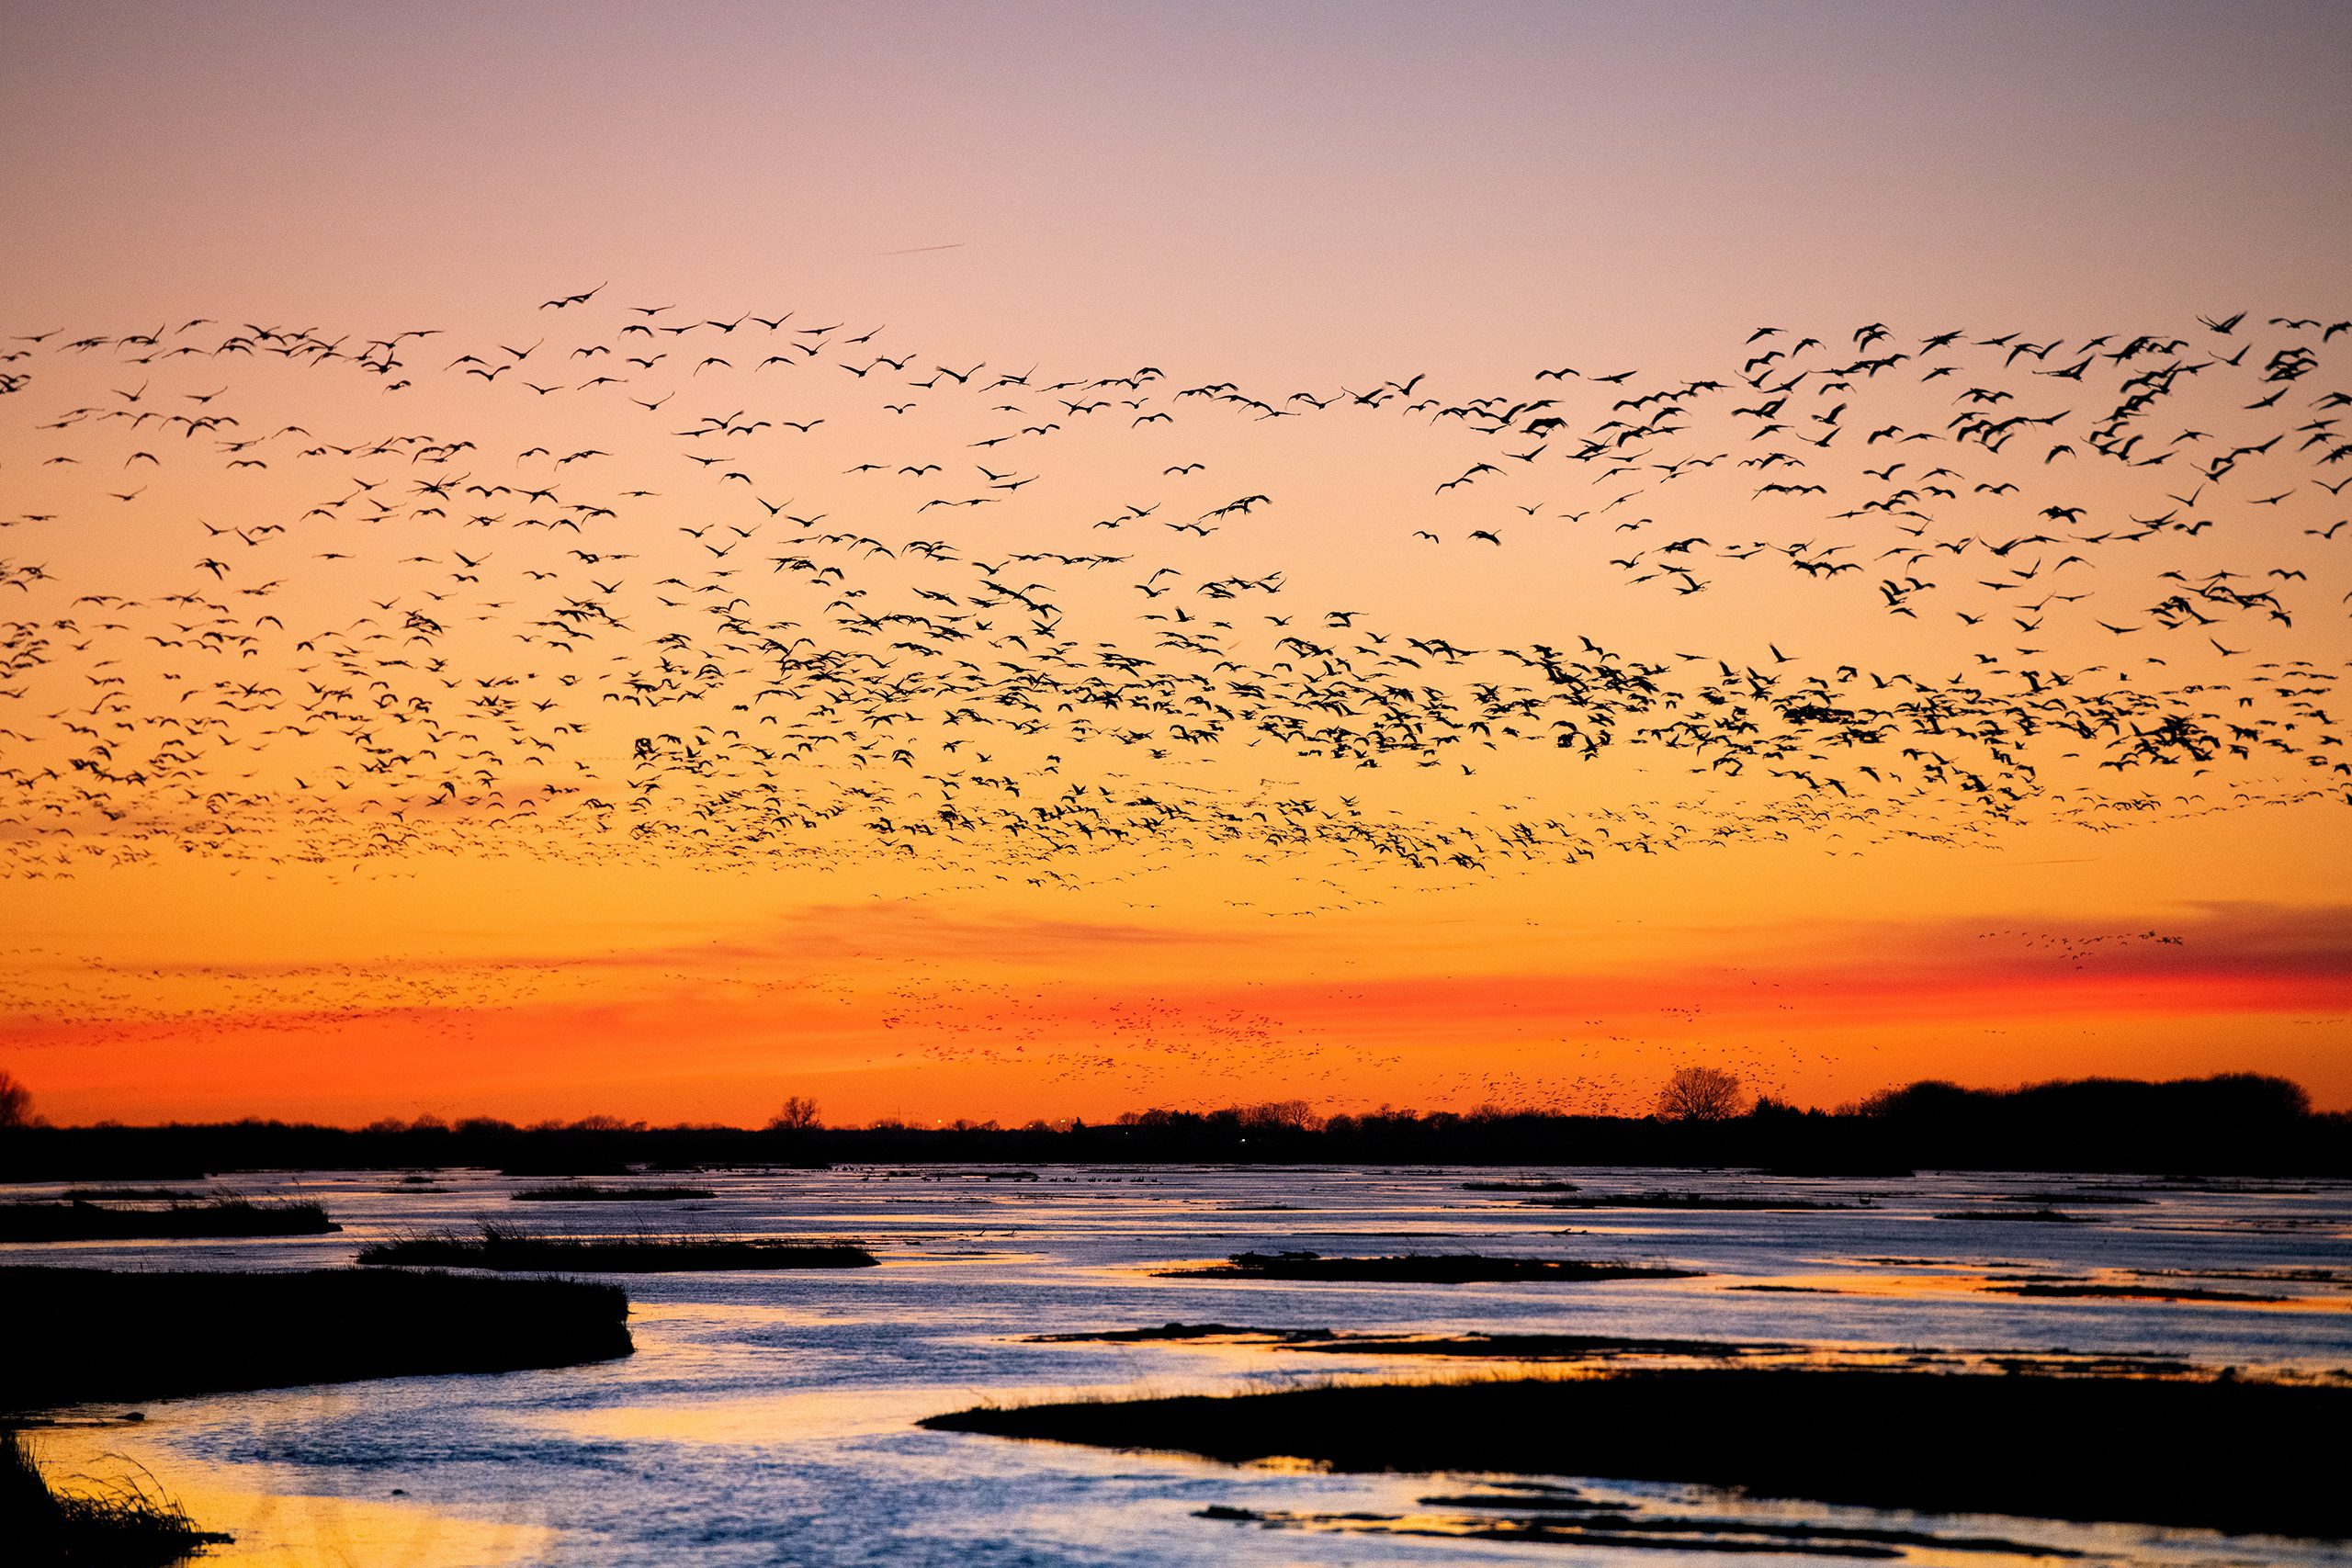 The Great Sandhill Crane Migration flying over a river at sunset.